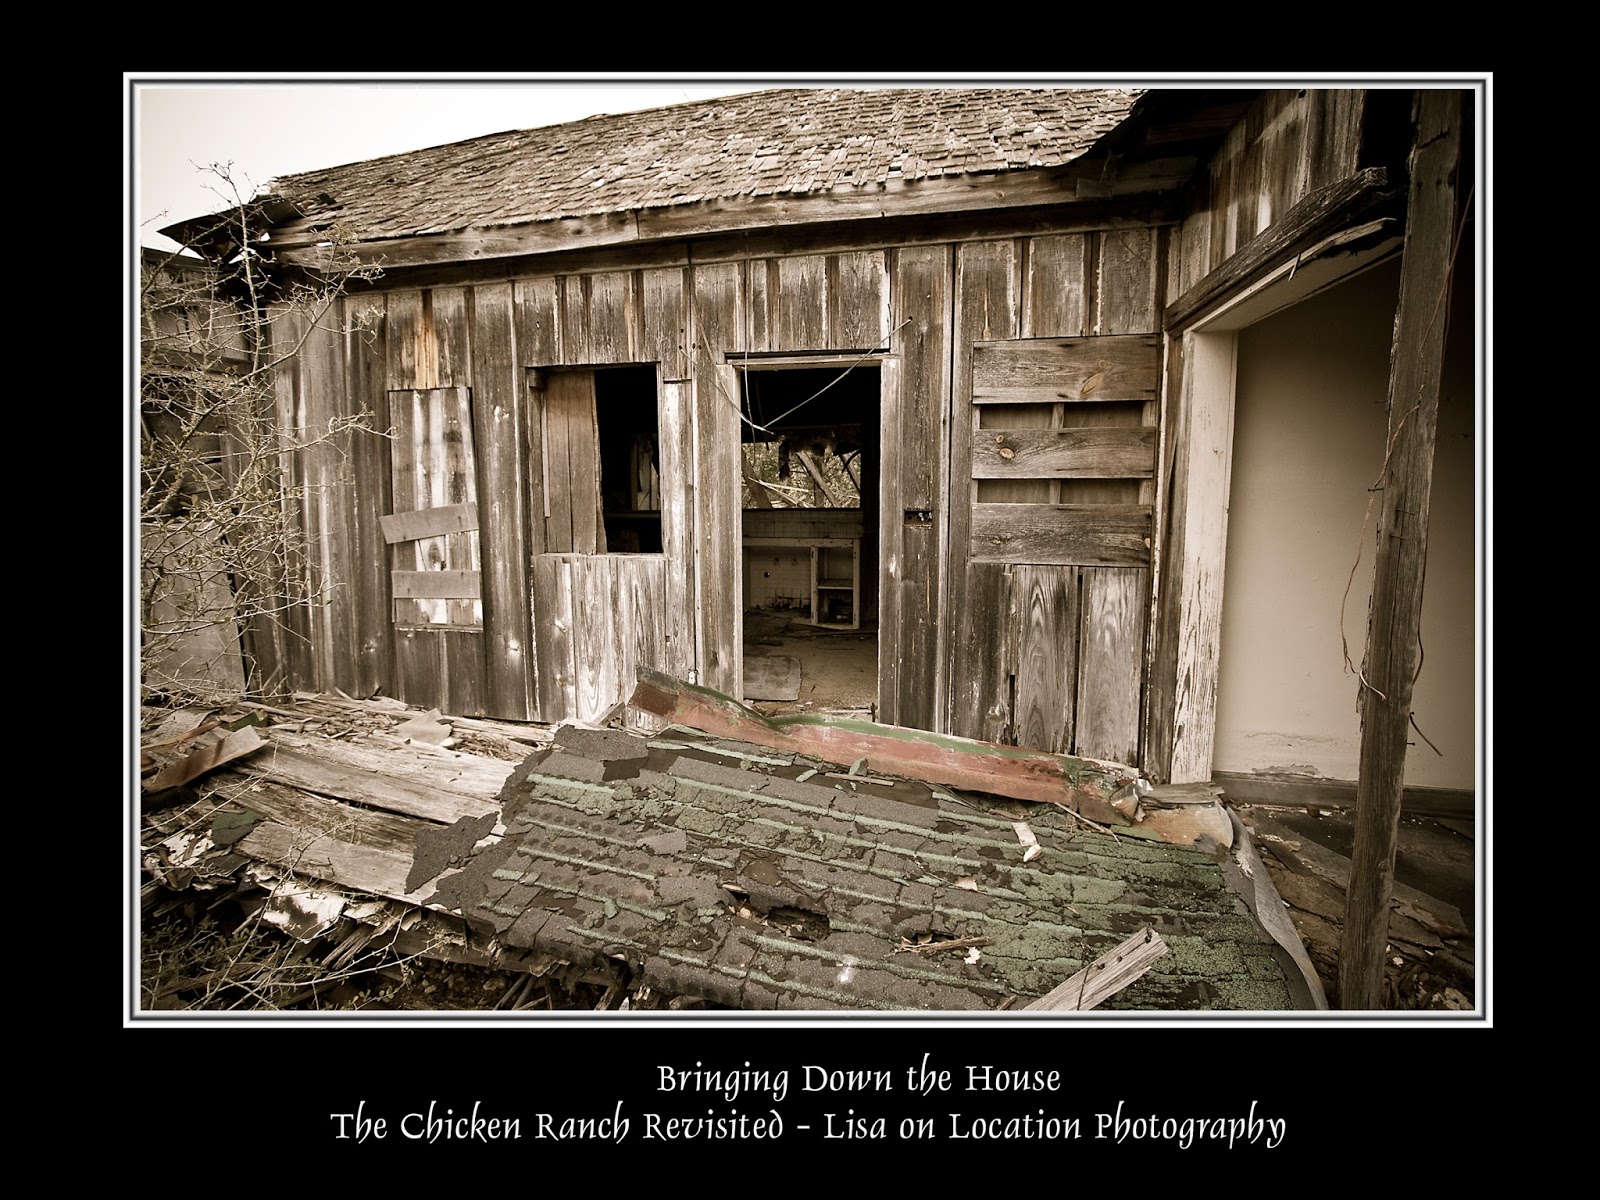 Lisa on Location: It's Finally Out! Inside the Texas Chicken Ranch: Definitive Account ...